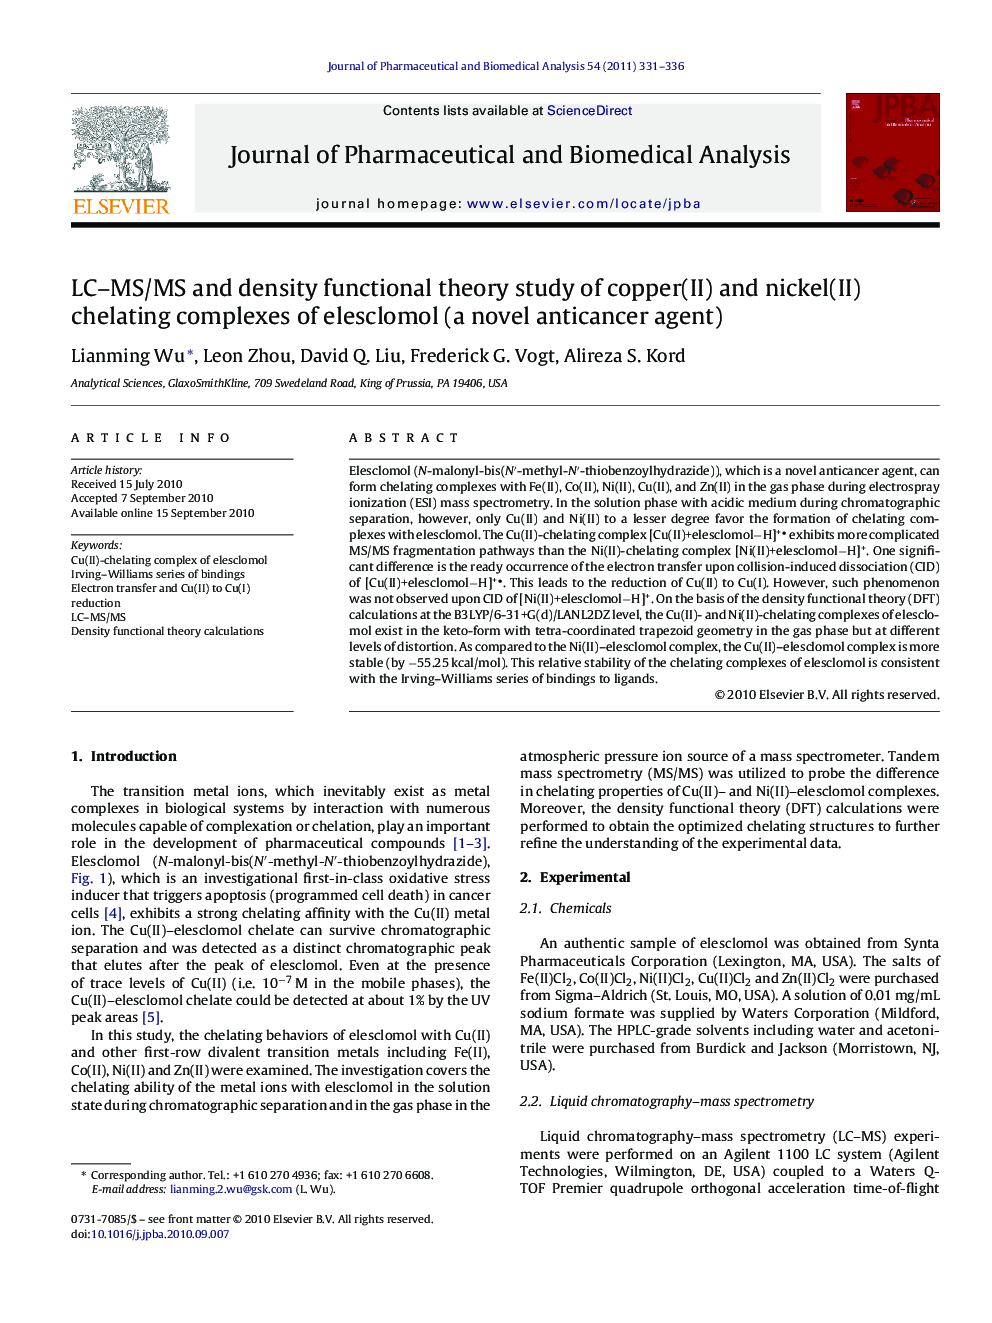 LC–MS/MS and density functional theory study of copper(II) and nickel(II) chelating complexes of elesclomol (a novel anticancer agent)